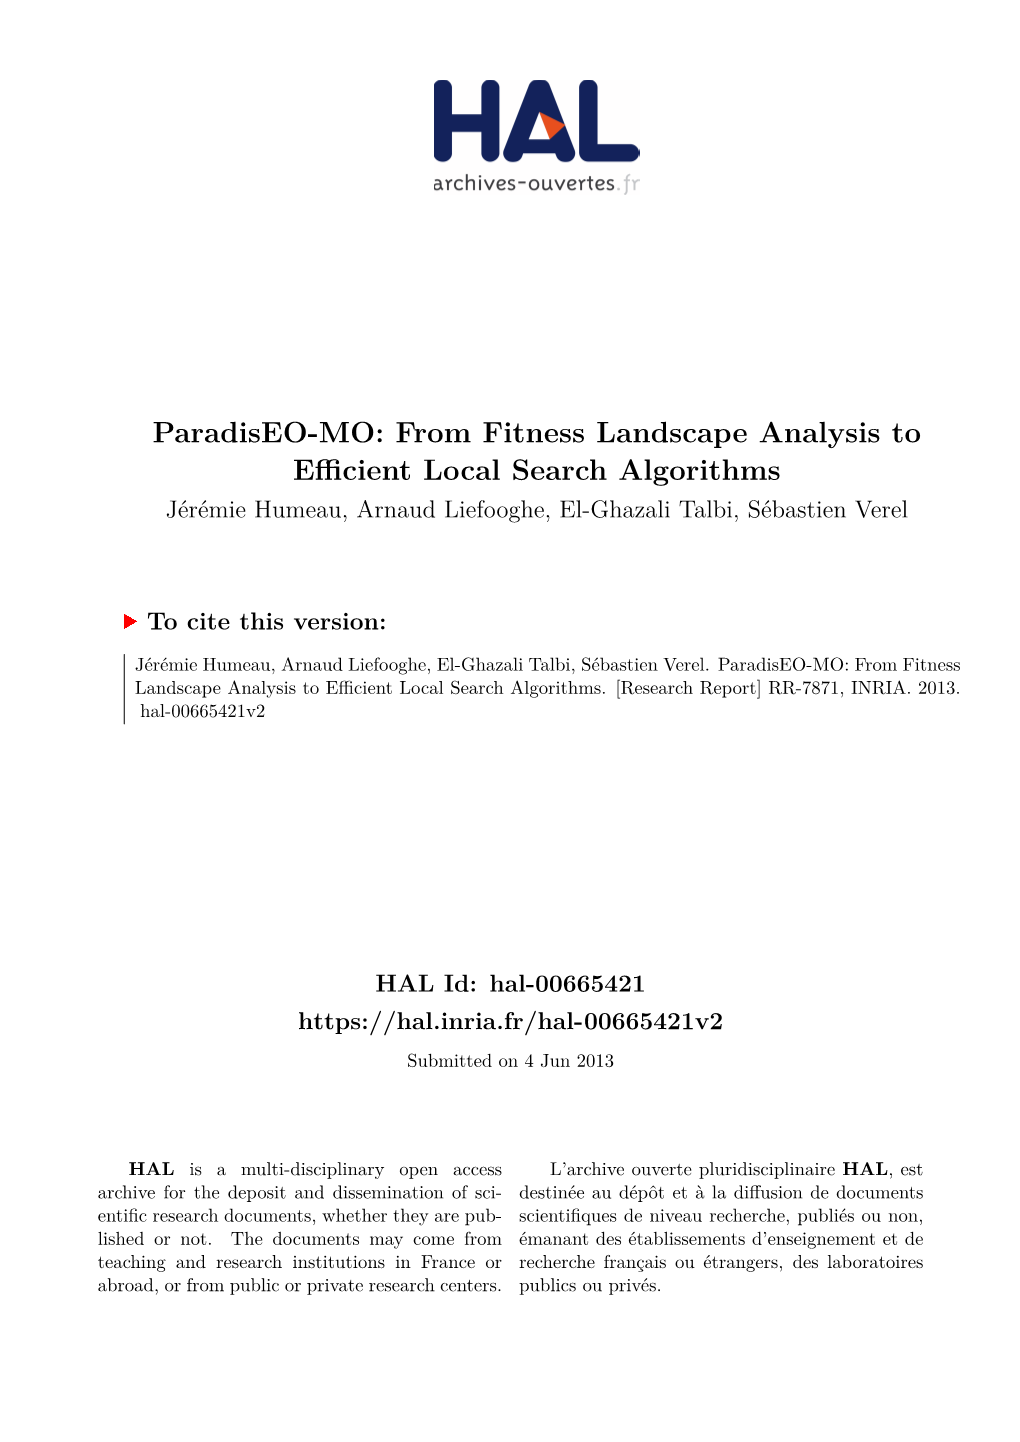 From Fitness Landscape Analysis to Efficient Local Search Algorithms